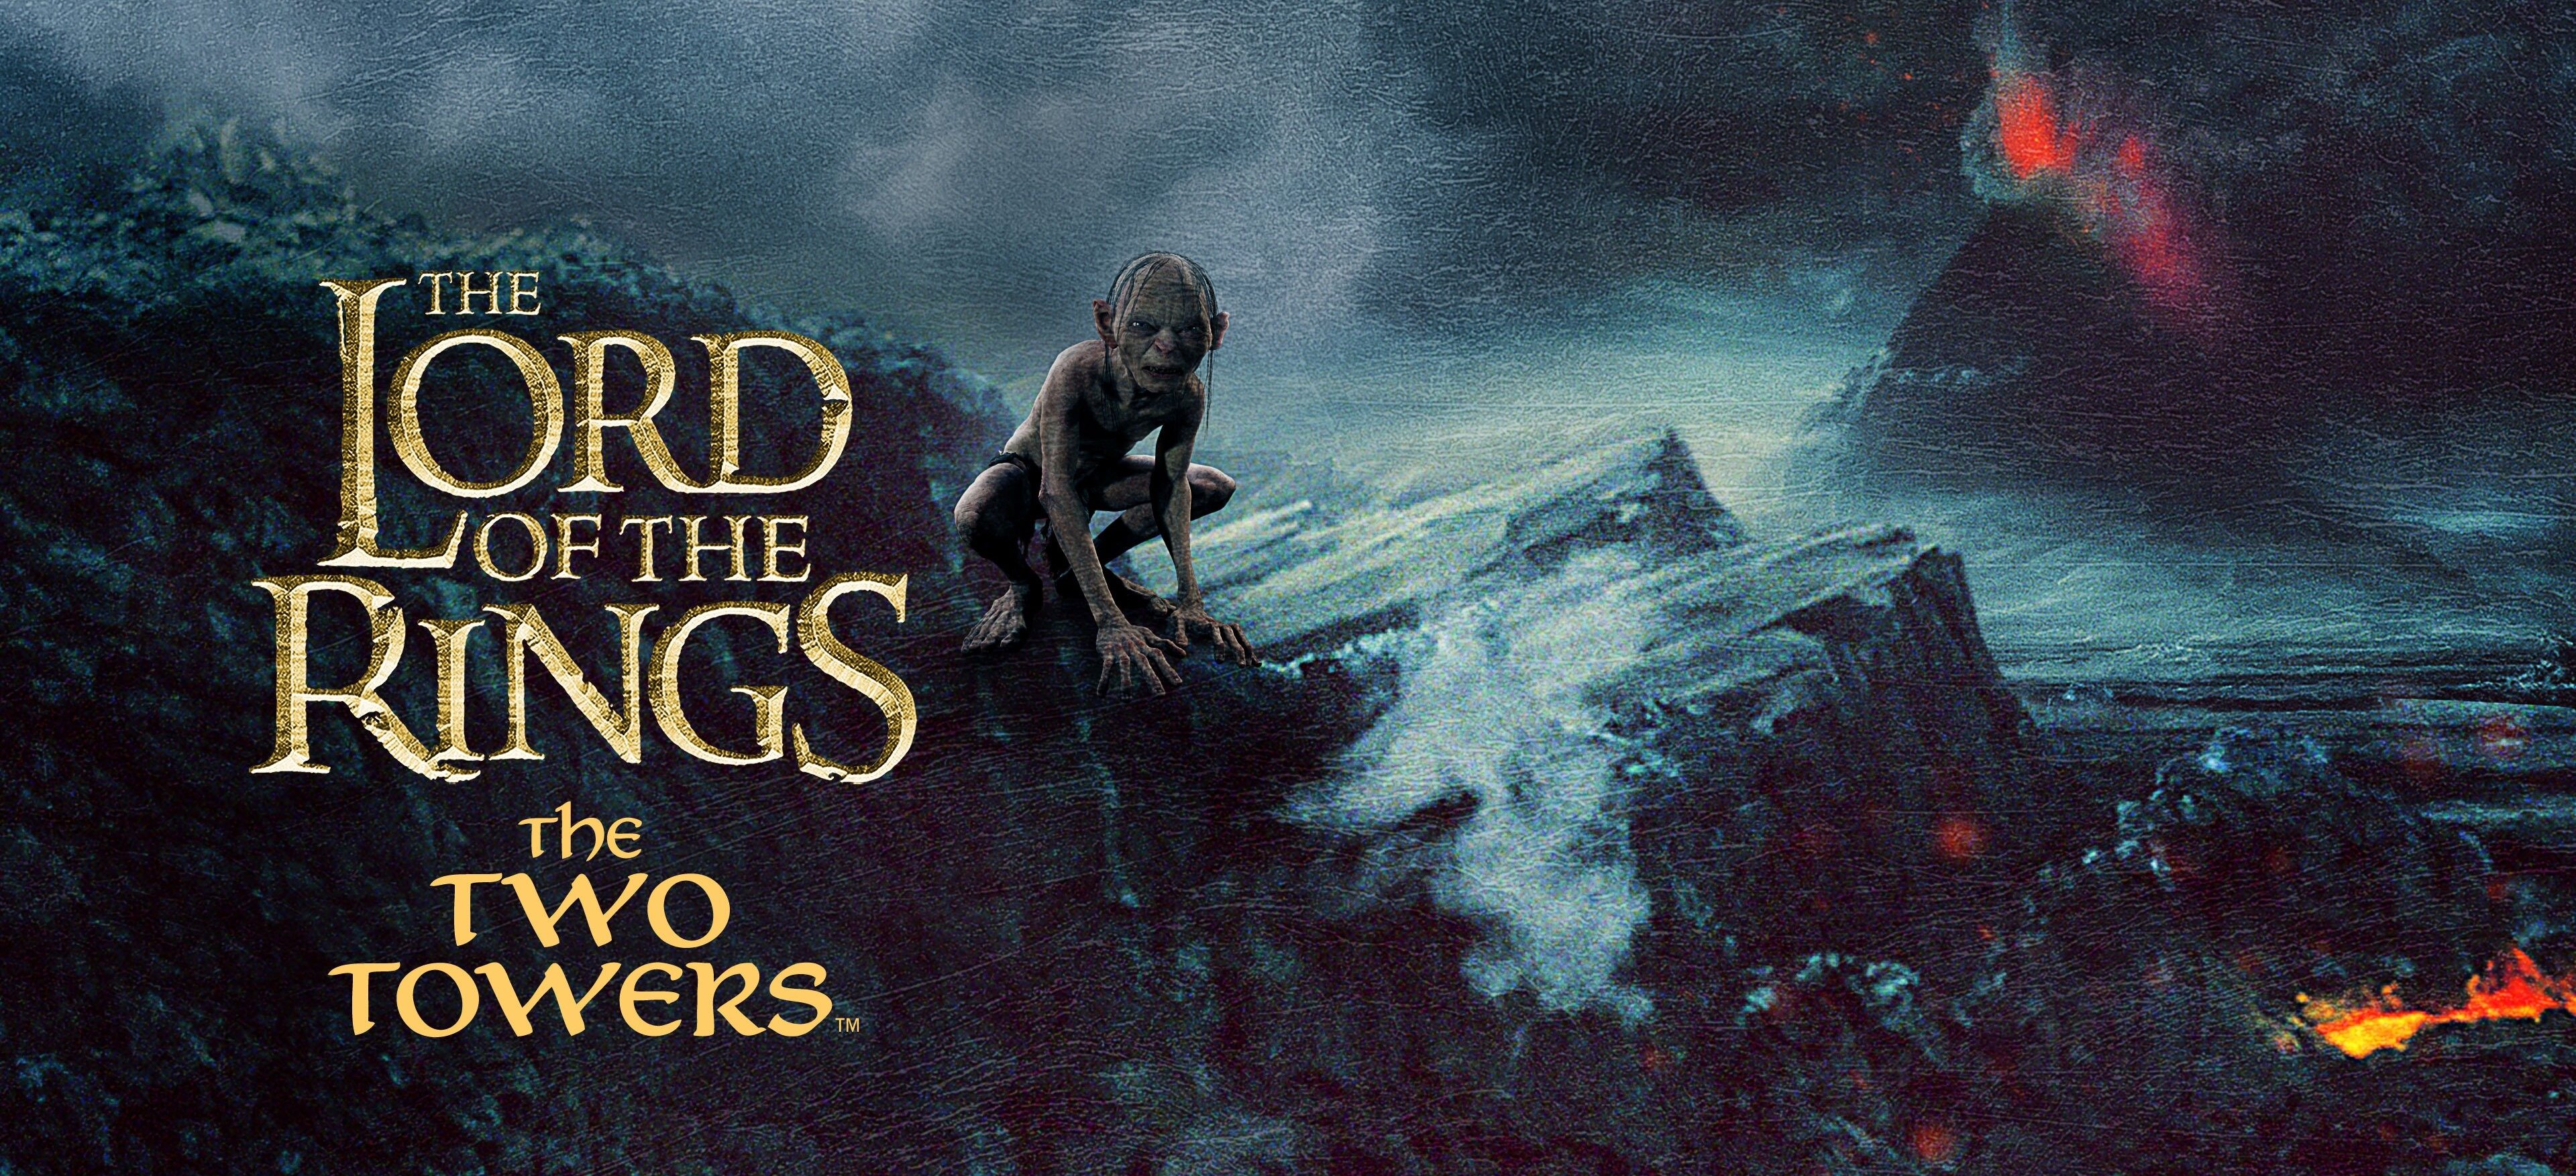 32-facts-about-the-movie-the-lord-of-the-rings-the-two-towers